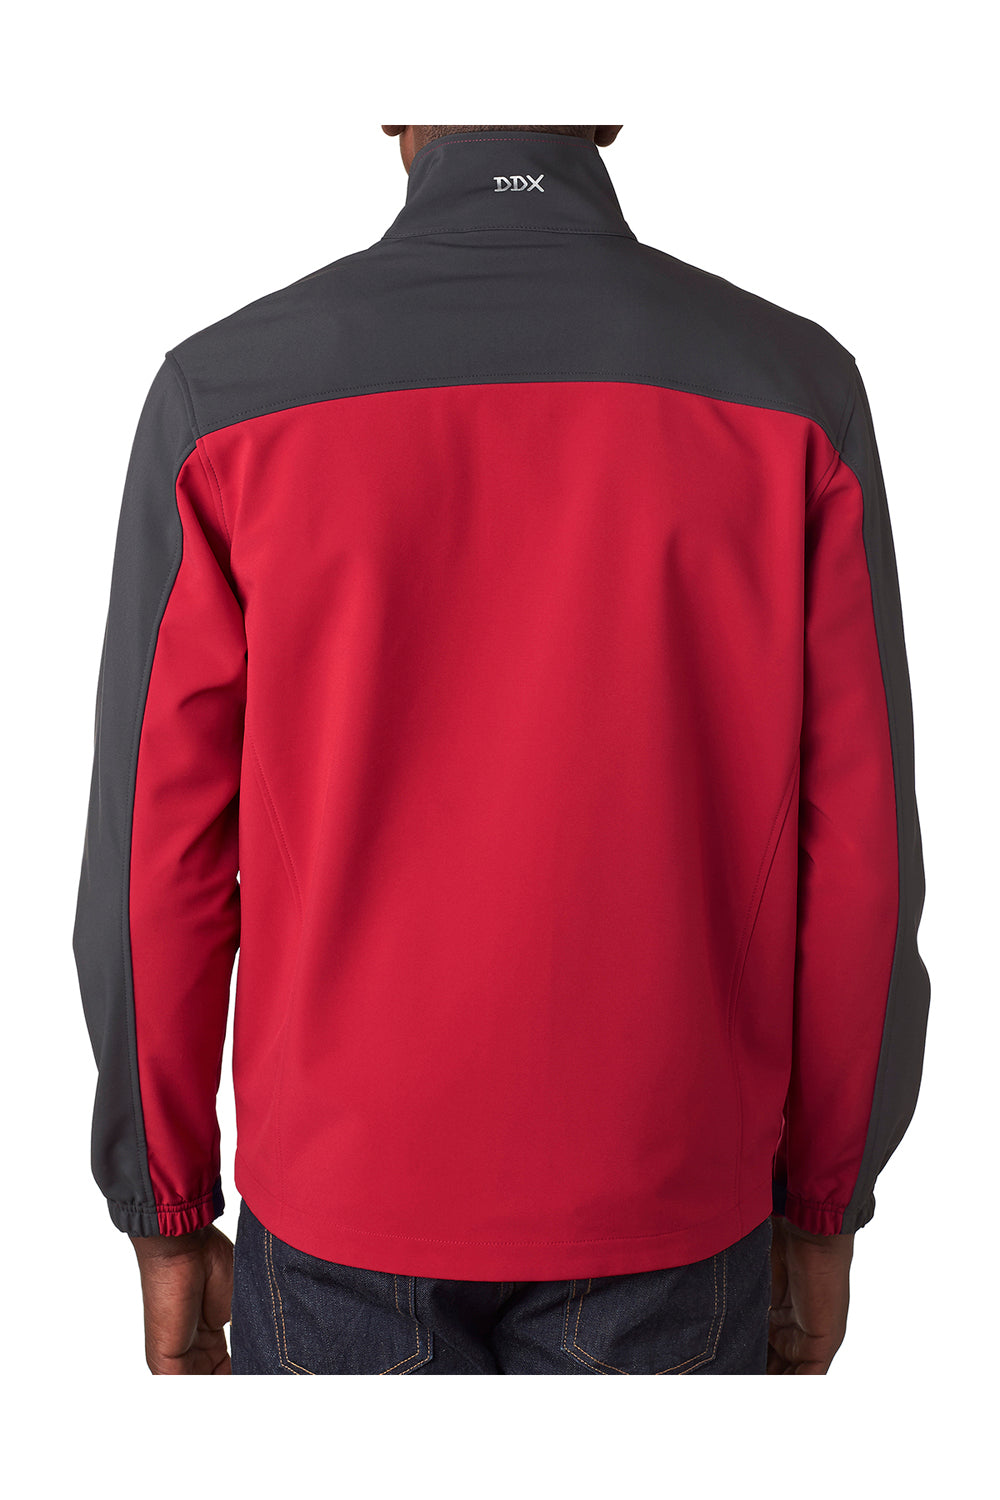 Dri Duck 5350 Mens Motion Wind & Water Resistant Full Zip Jacket Red/Charcoal Grey Back